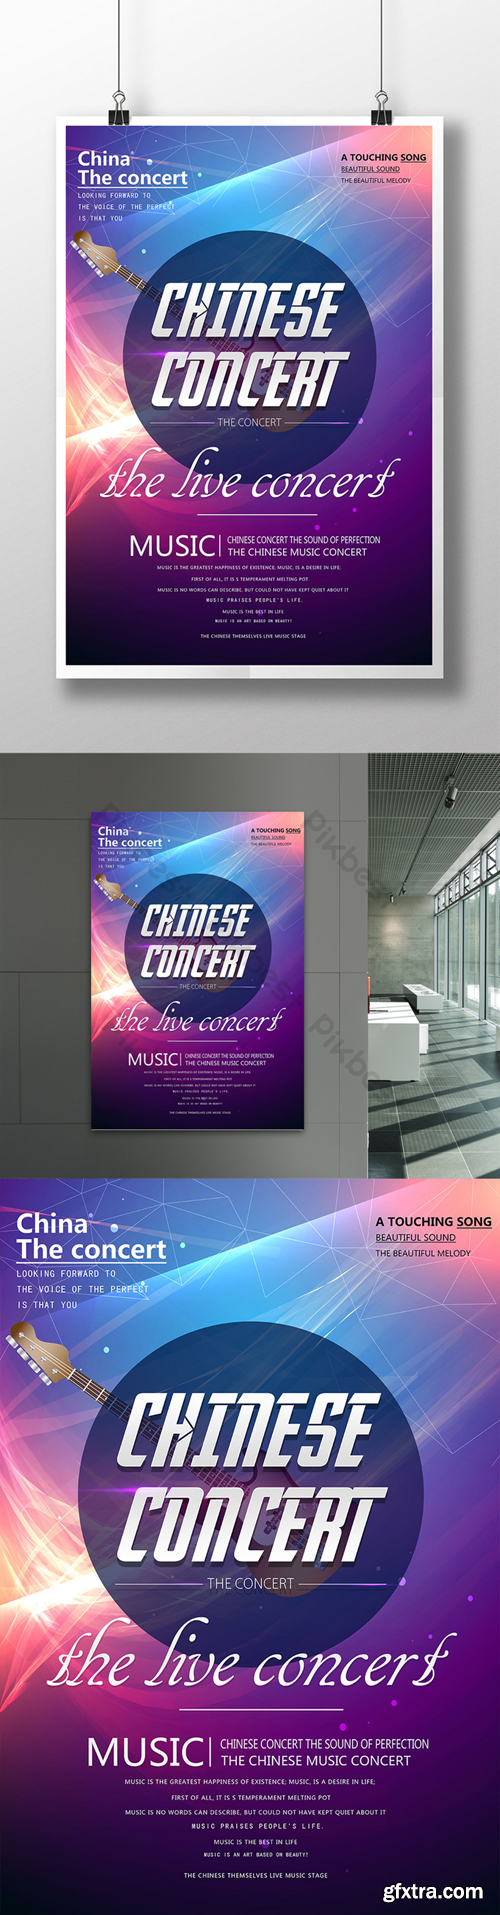 Chinese Concert Creative Music Poster Template PSD